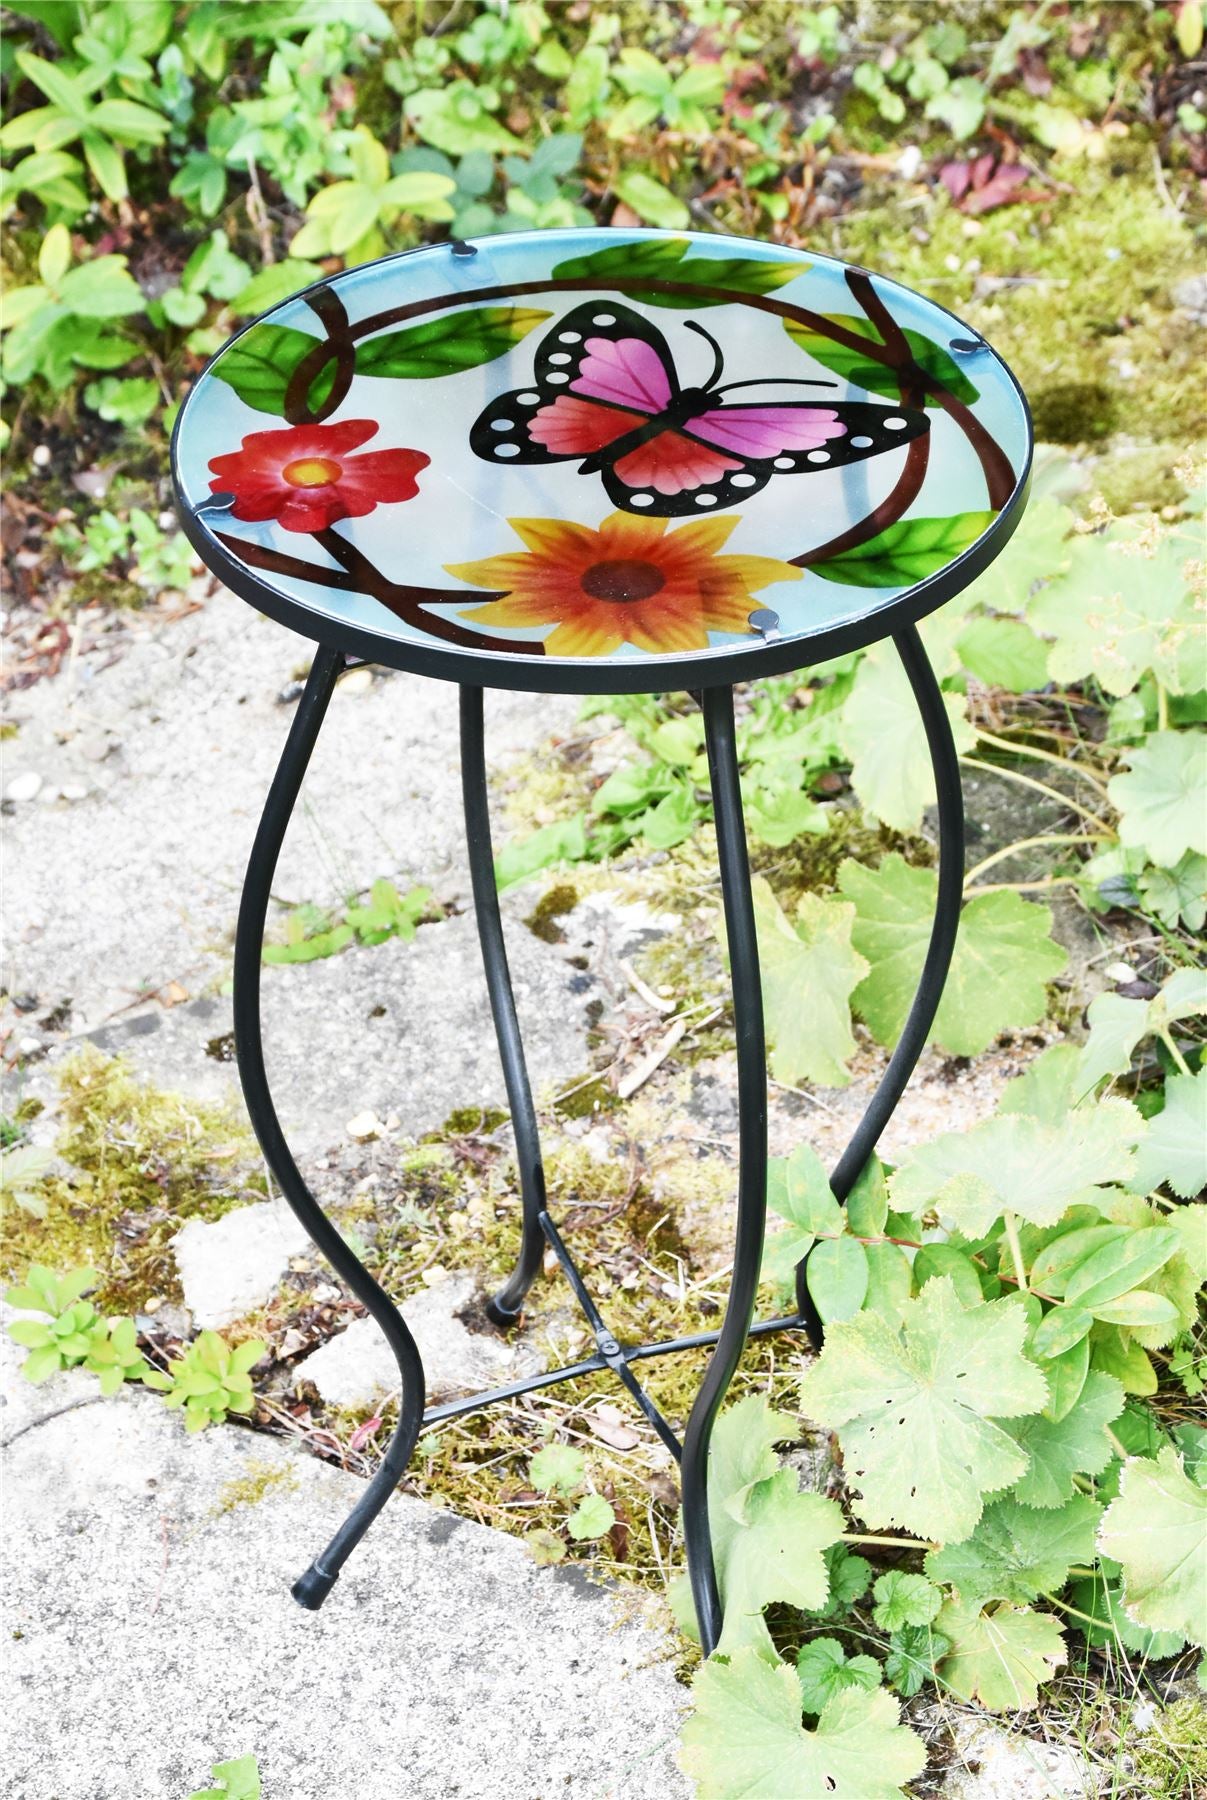 GEEZY table Round Side Mosaic Table With Small Butterfly Design